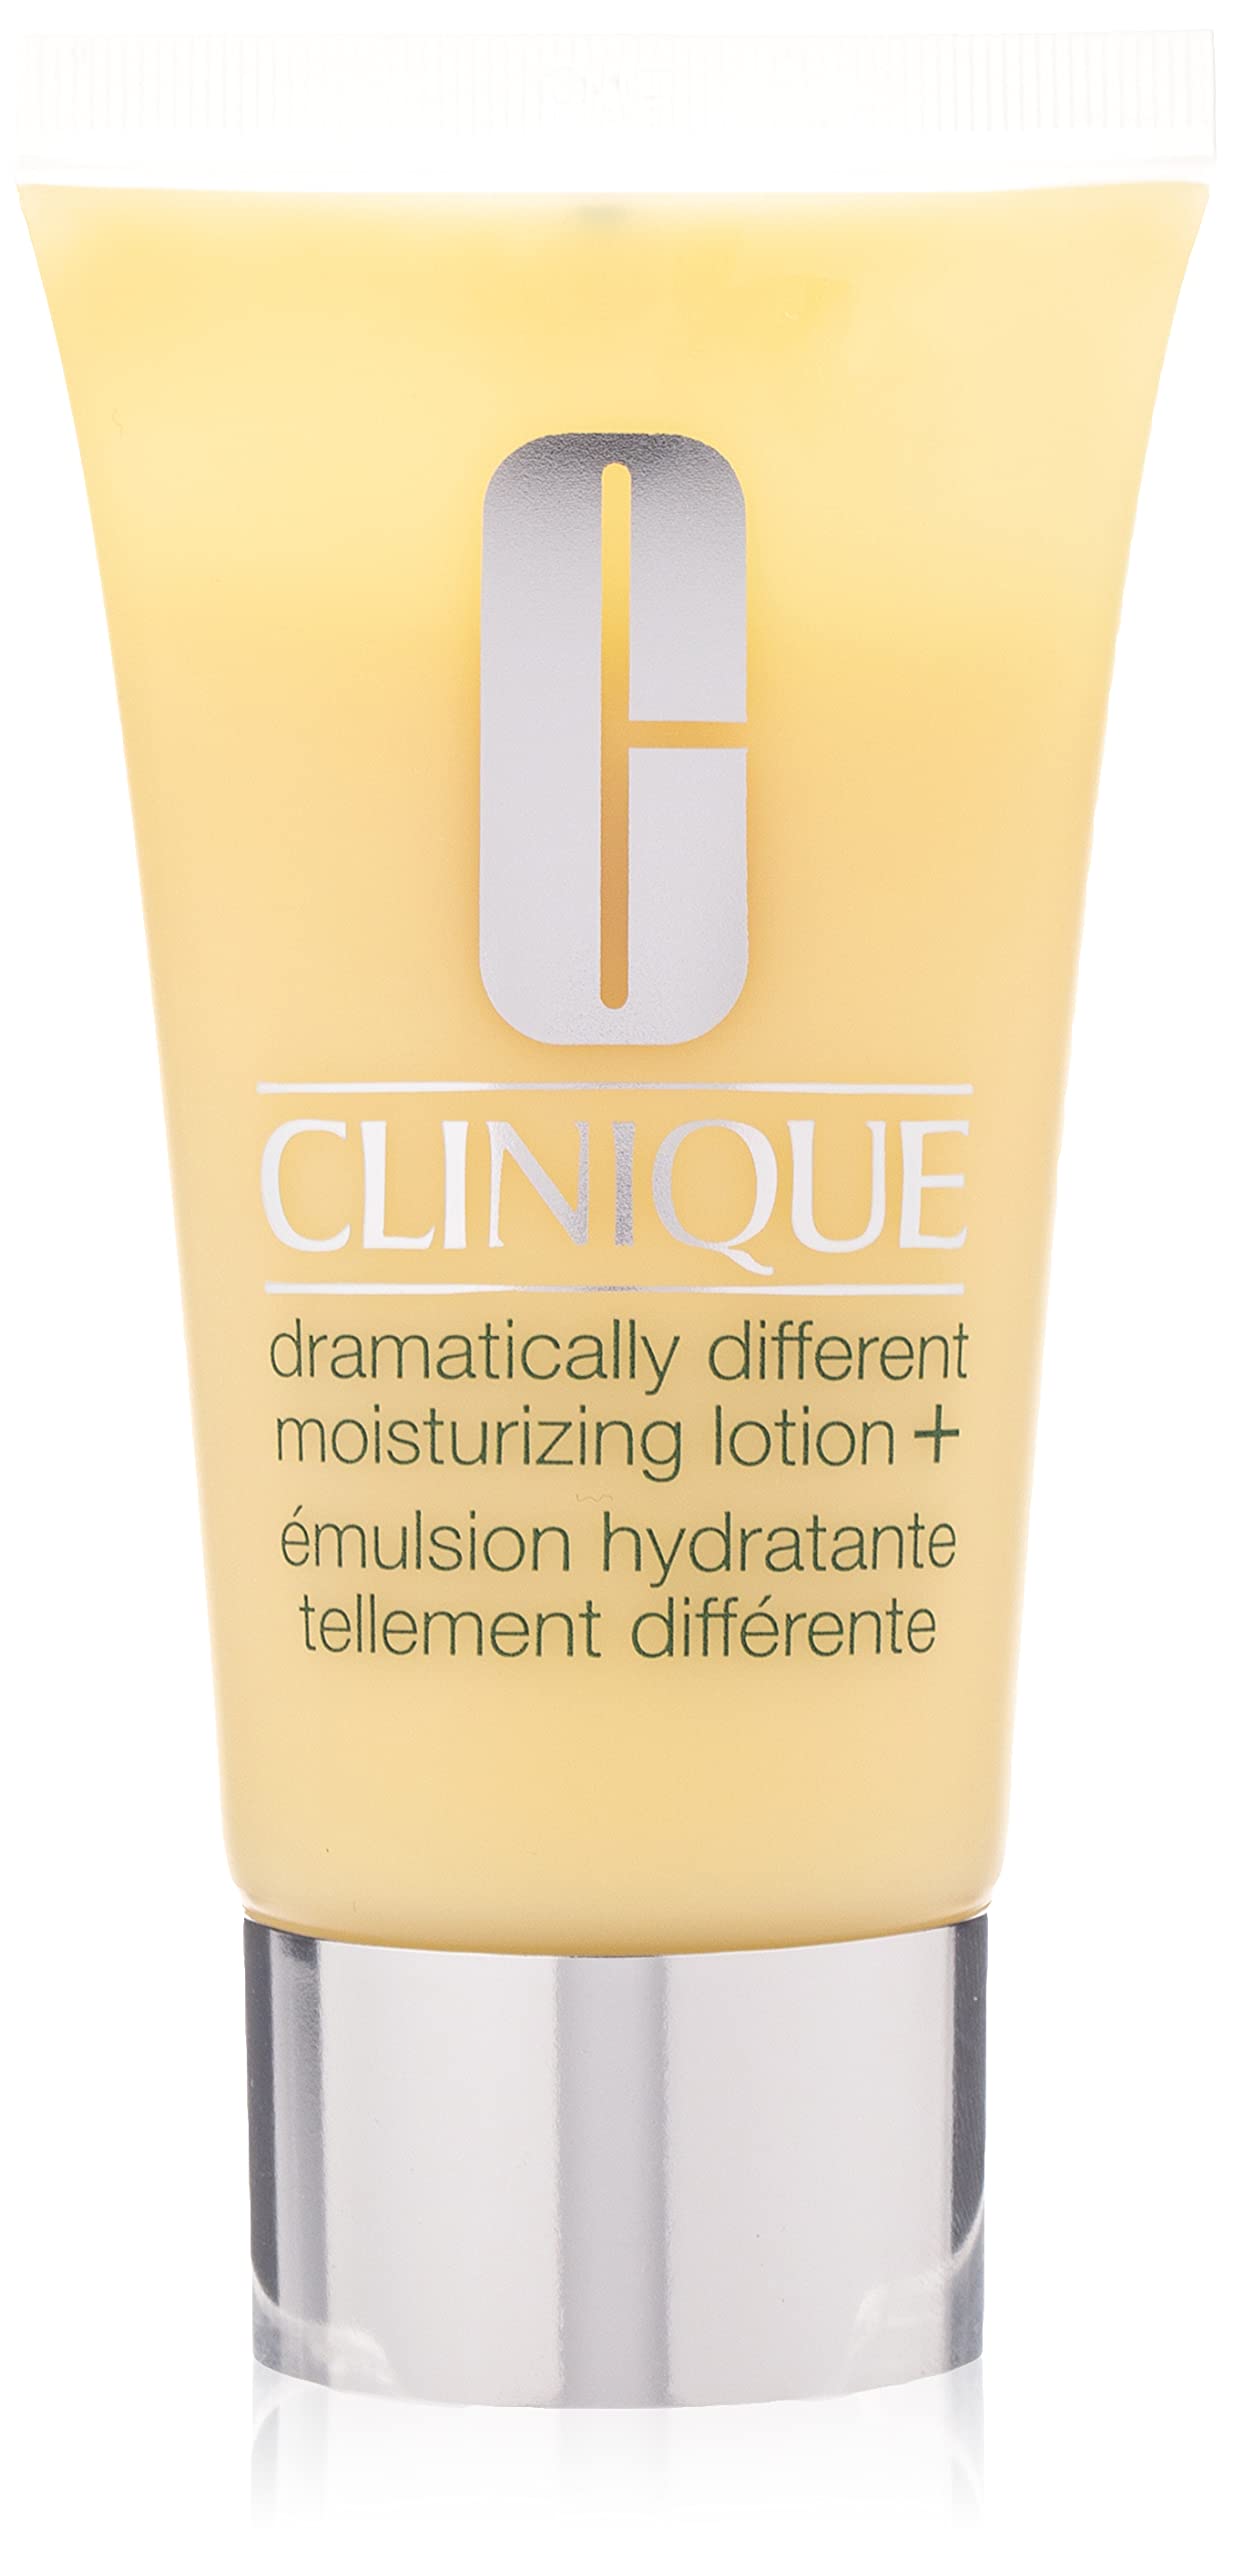 Clinique DRAMATICALLY DIFFERENT MOISTURIZING LOTION+ TUBE DRY TO NORMAL SKIN